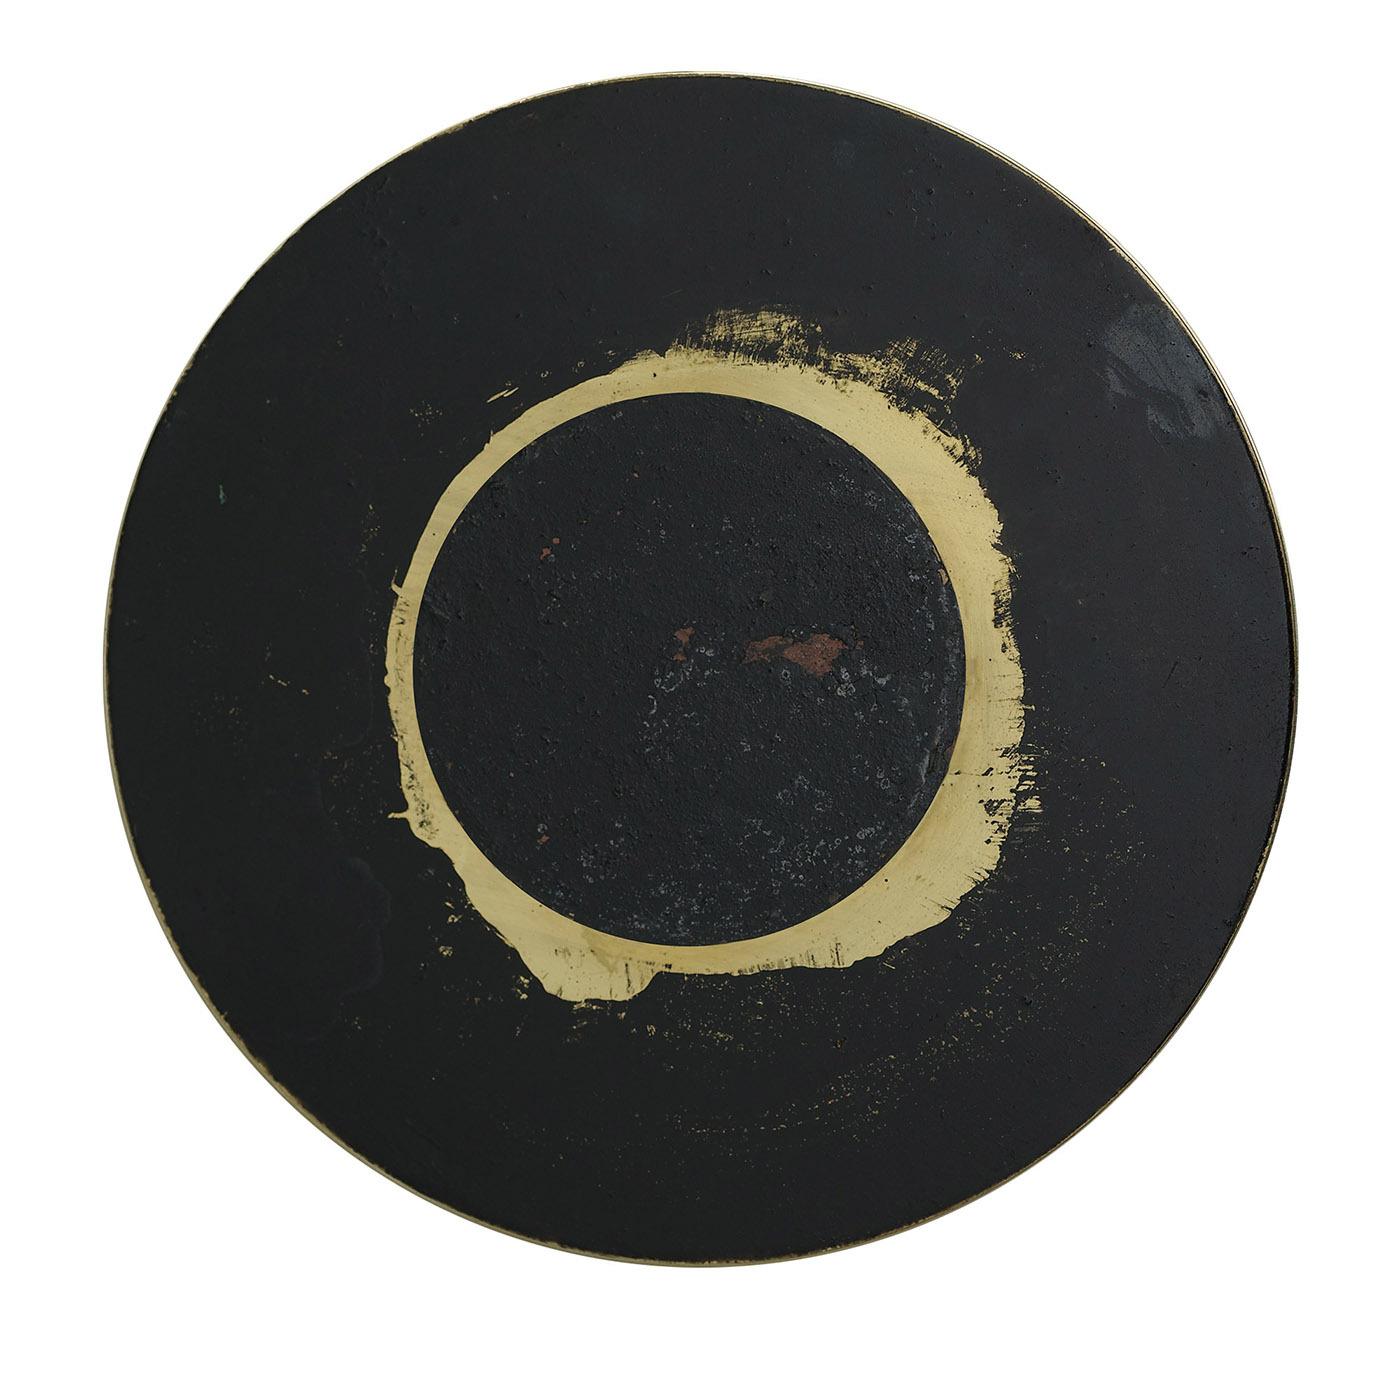 This one-of-a-kind decorative disk celebrates the unpredictable, abstract traceries revealed by oxides applied to a glistening brass backdrop. Deftly crafted by hand and signed at the back, it brims with artistic character and comes equipped with a